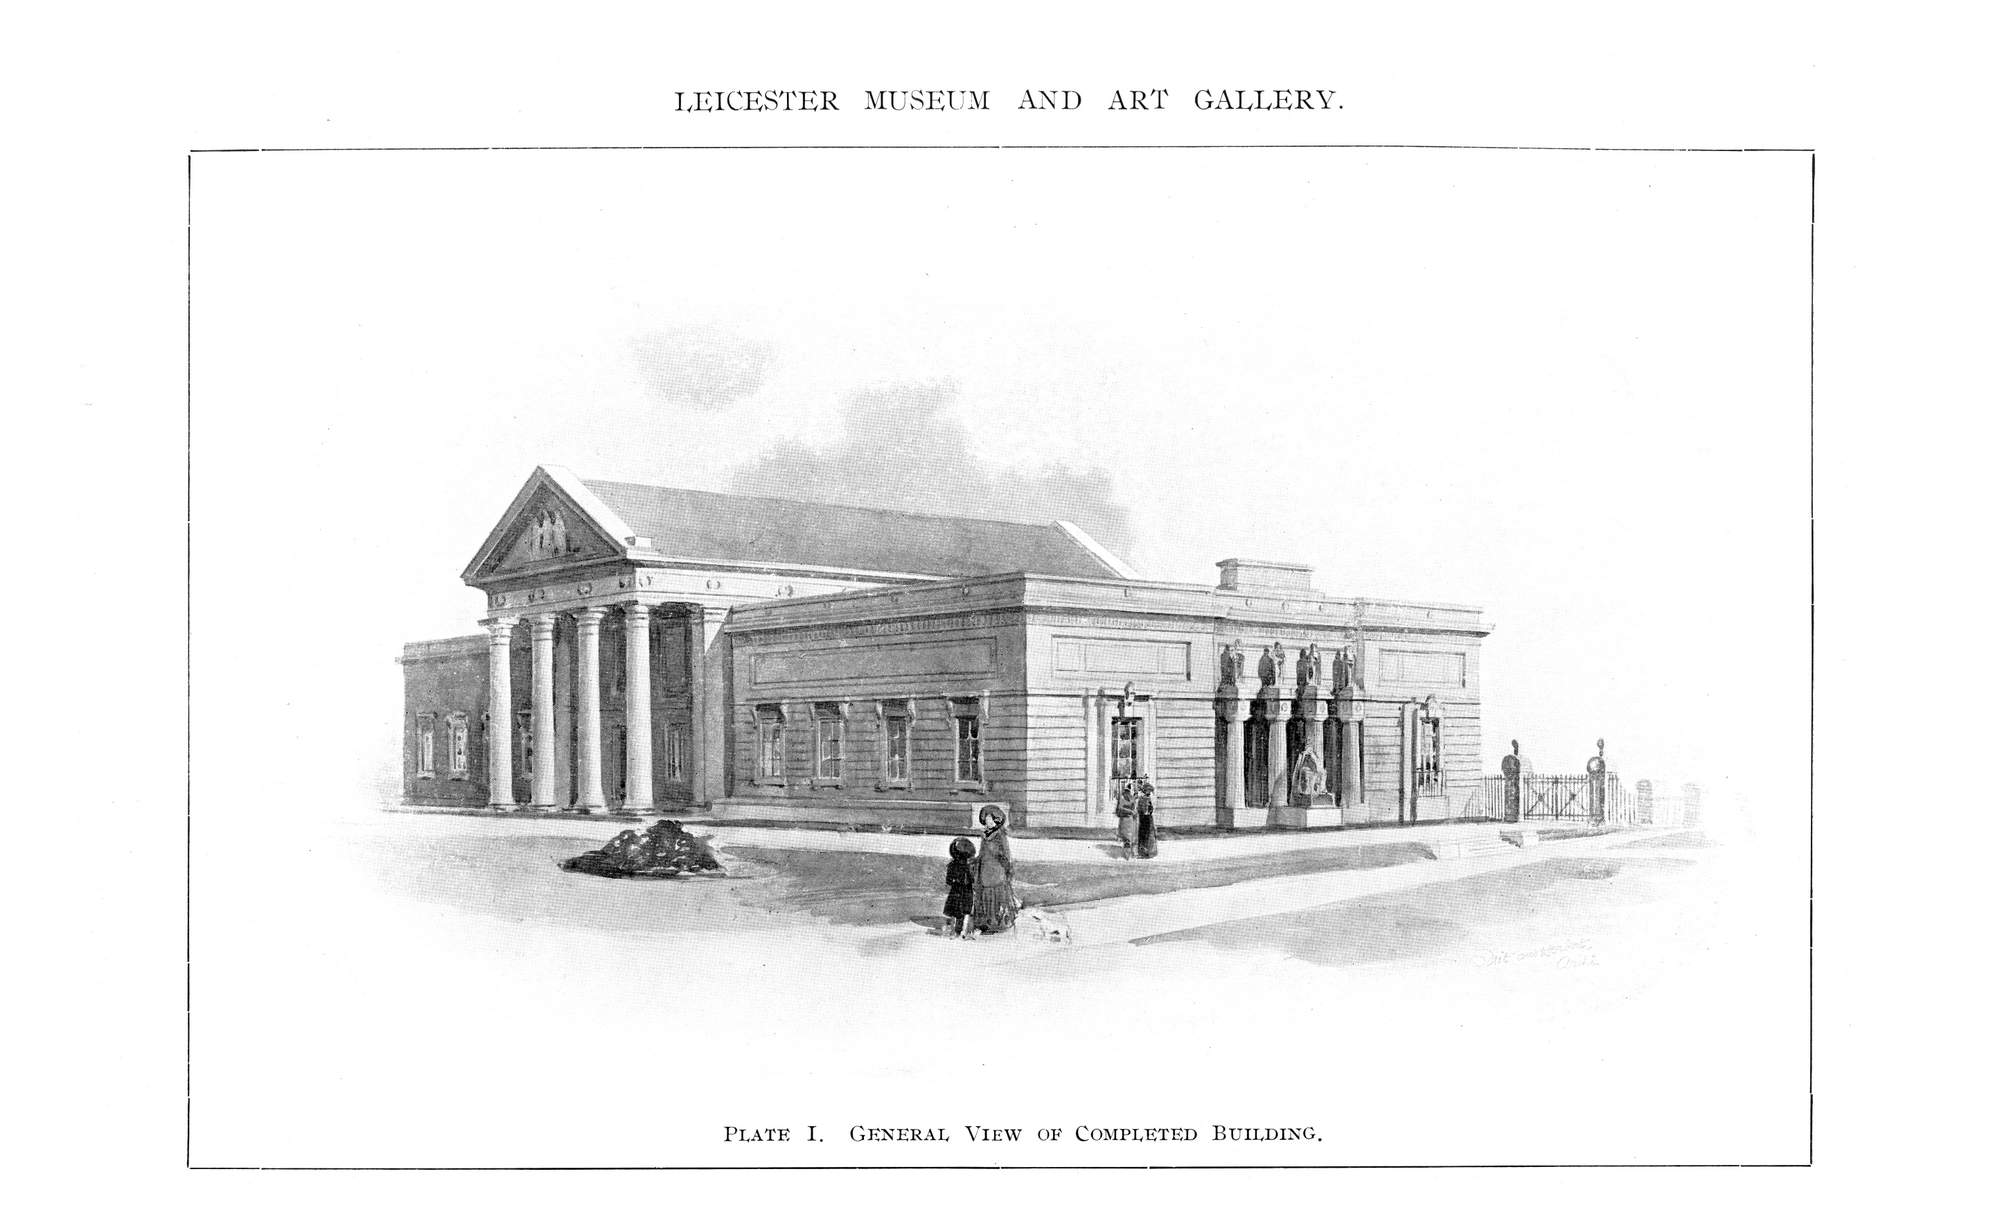 A general view of the completed building, designed by Leicester architect Albert Herbert.